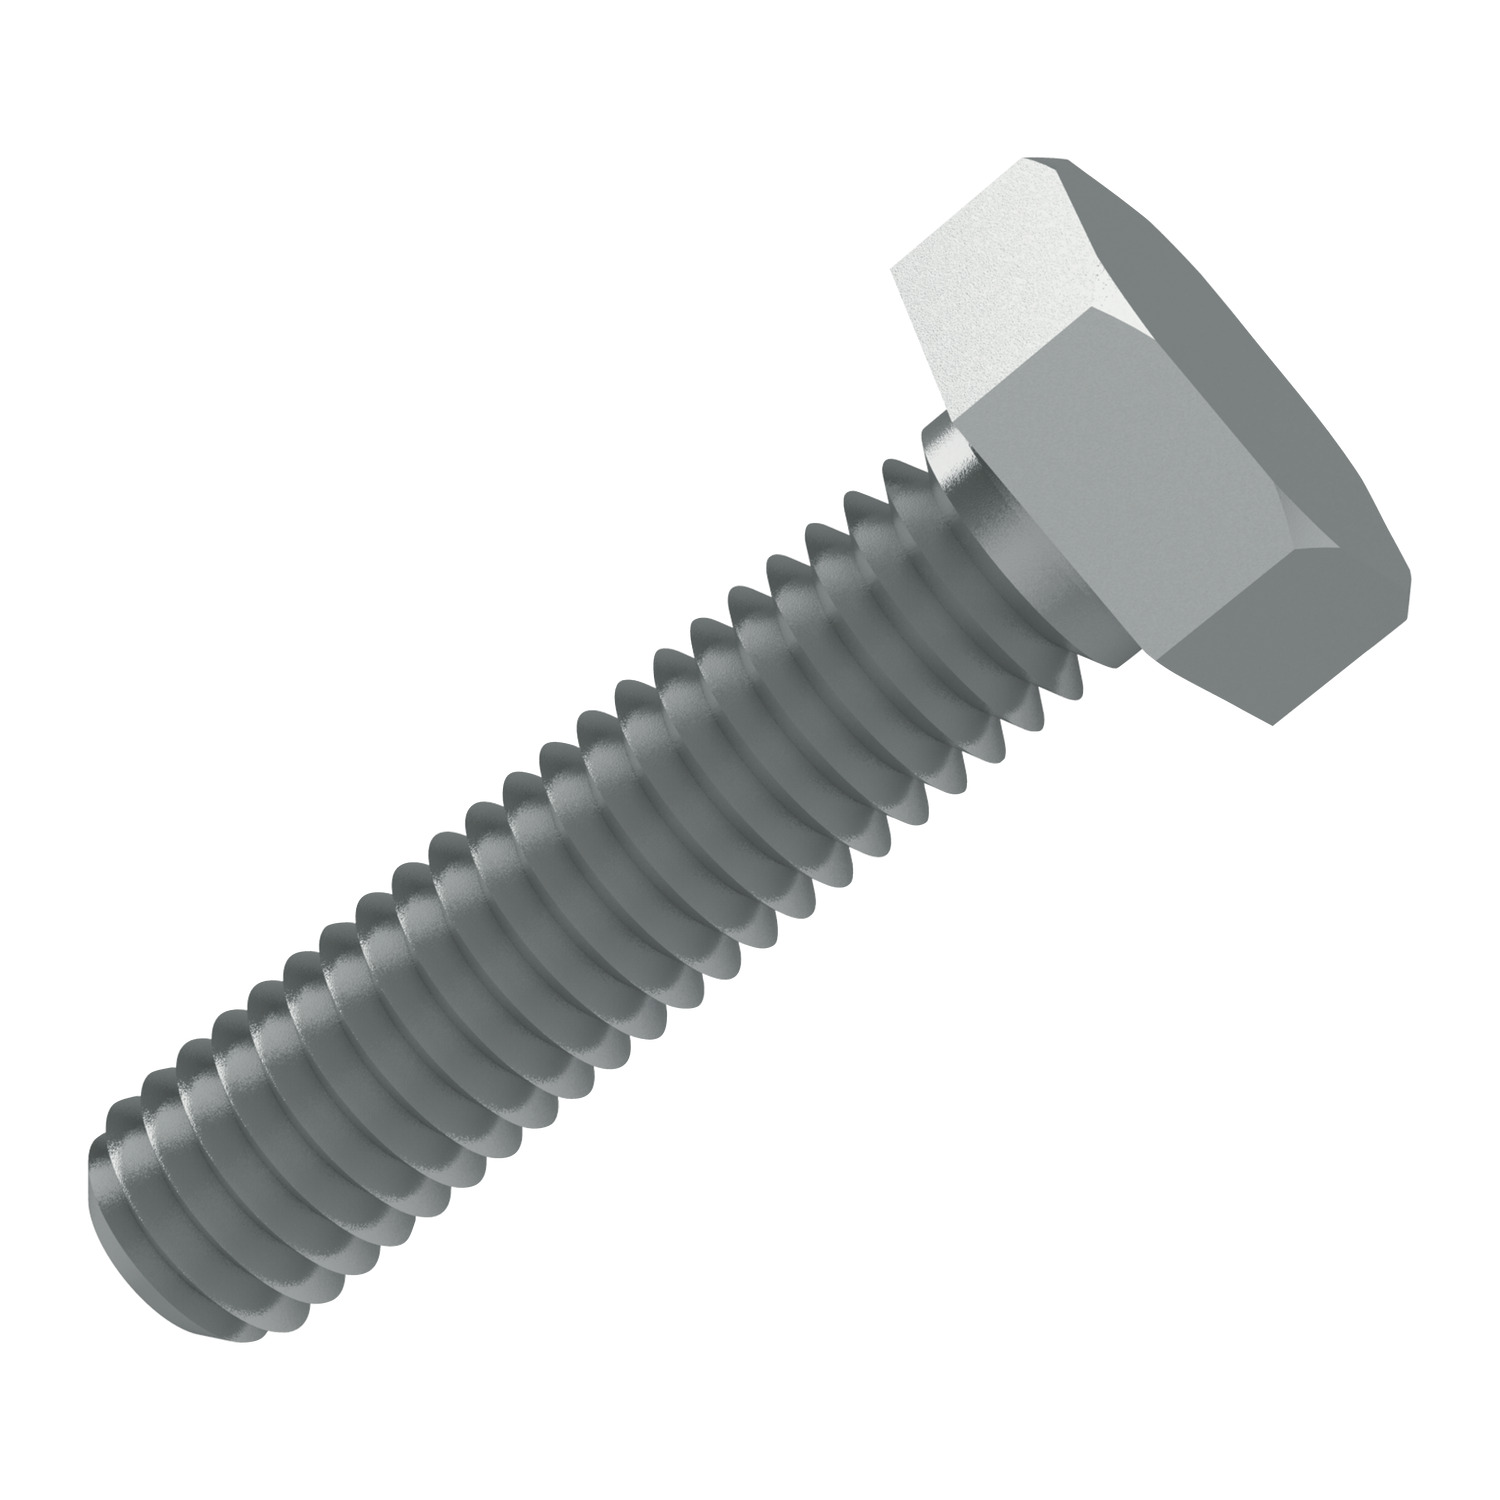 Titanium Hex Head Bolts Hex head bolts in ASTM B348 grade 2 titanium in stock. ASTM B348 grade 5 titanium alloy available on request - easily manufactured on our fully automated machines. A vented titanium hex head bolt can be produced for your high (and ultra-high) vacuum applications.
